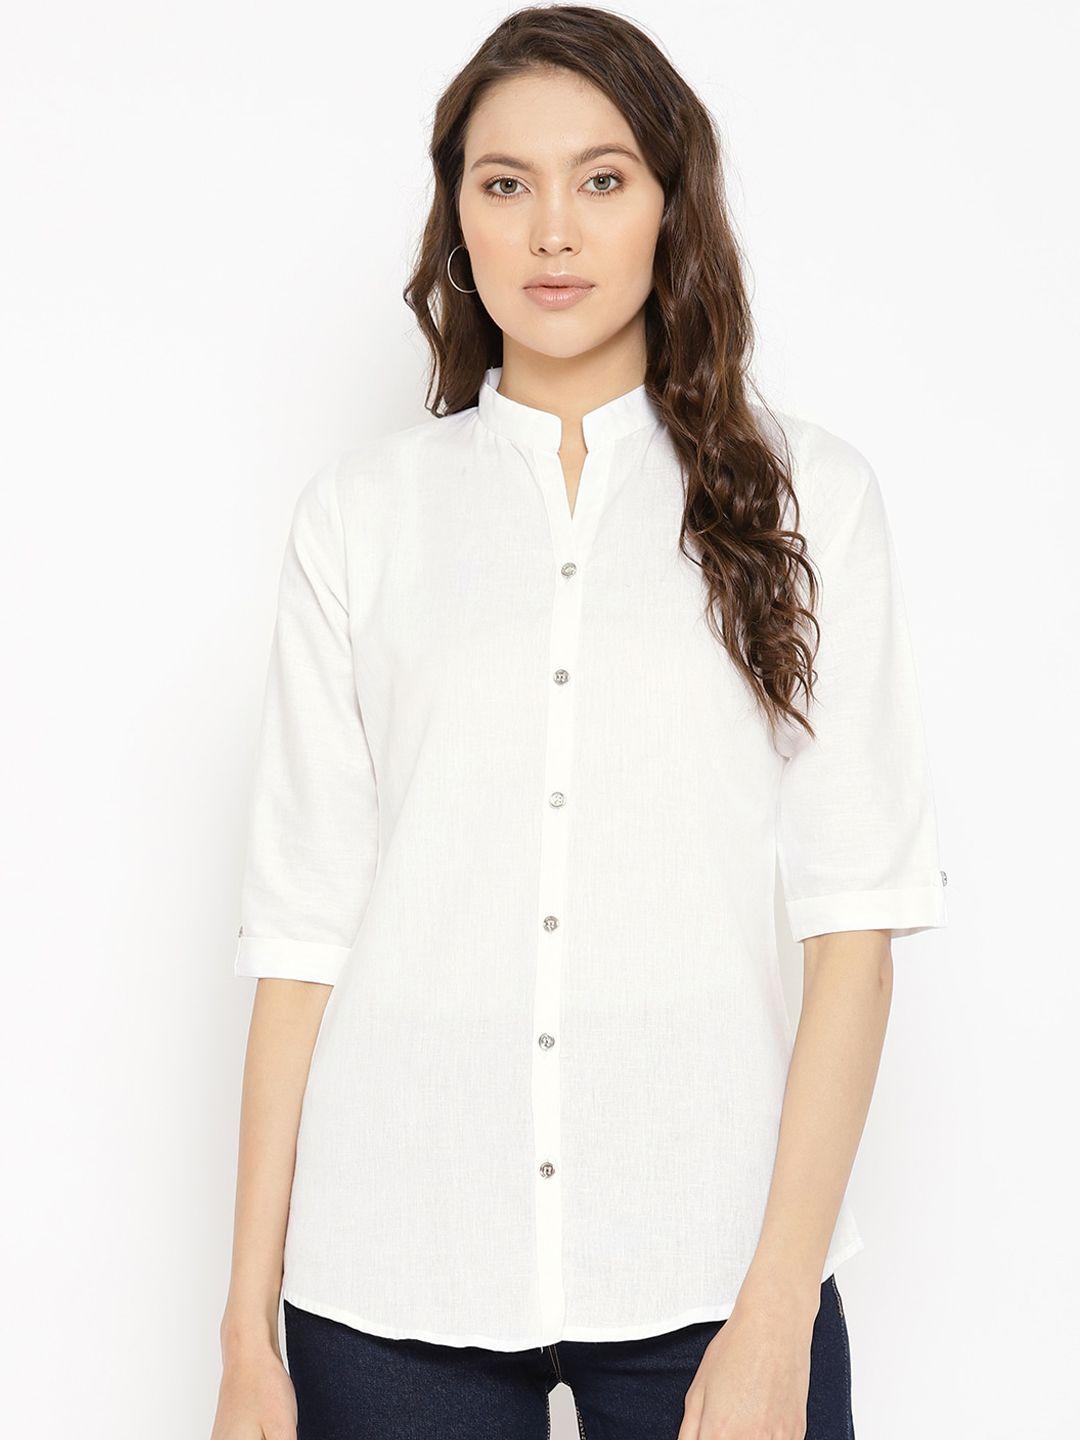 vastraa fusion women white regular fit solid pure cotton casual shirt